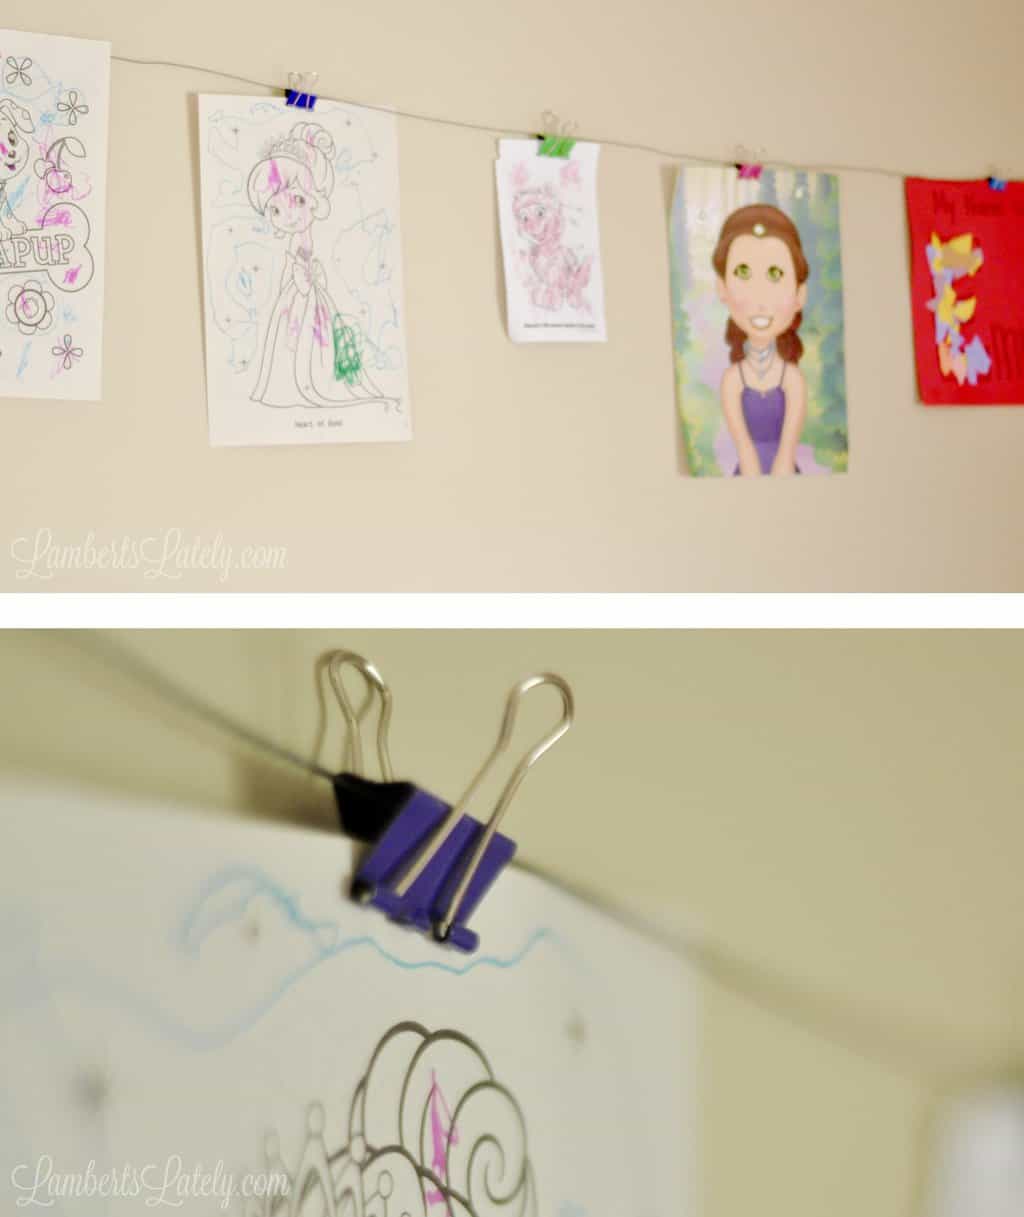 This post has great ideas for how to organize a playroom in ways that allow children to enjoy. Includes tips and tricks for grouping toys, DIY printable labels, and how to set up your room for success.